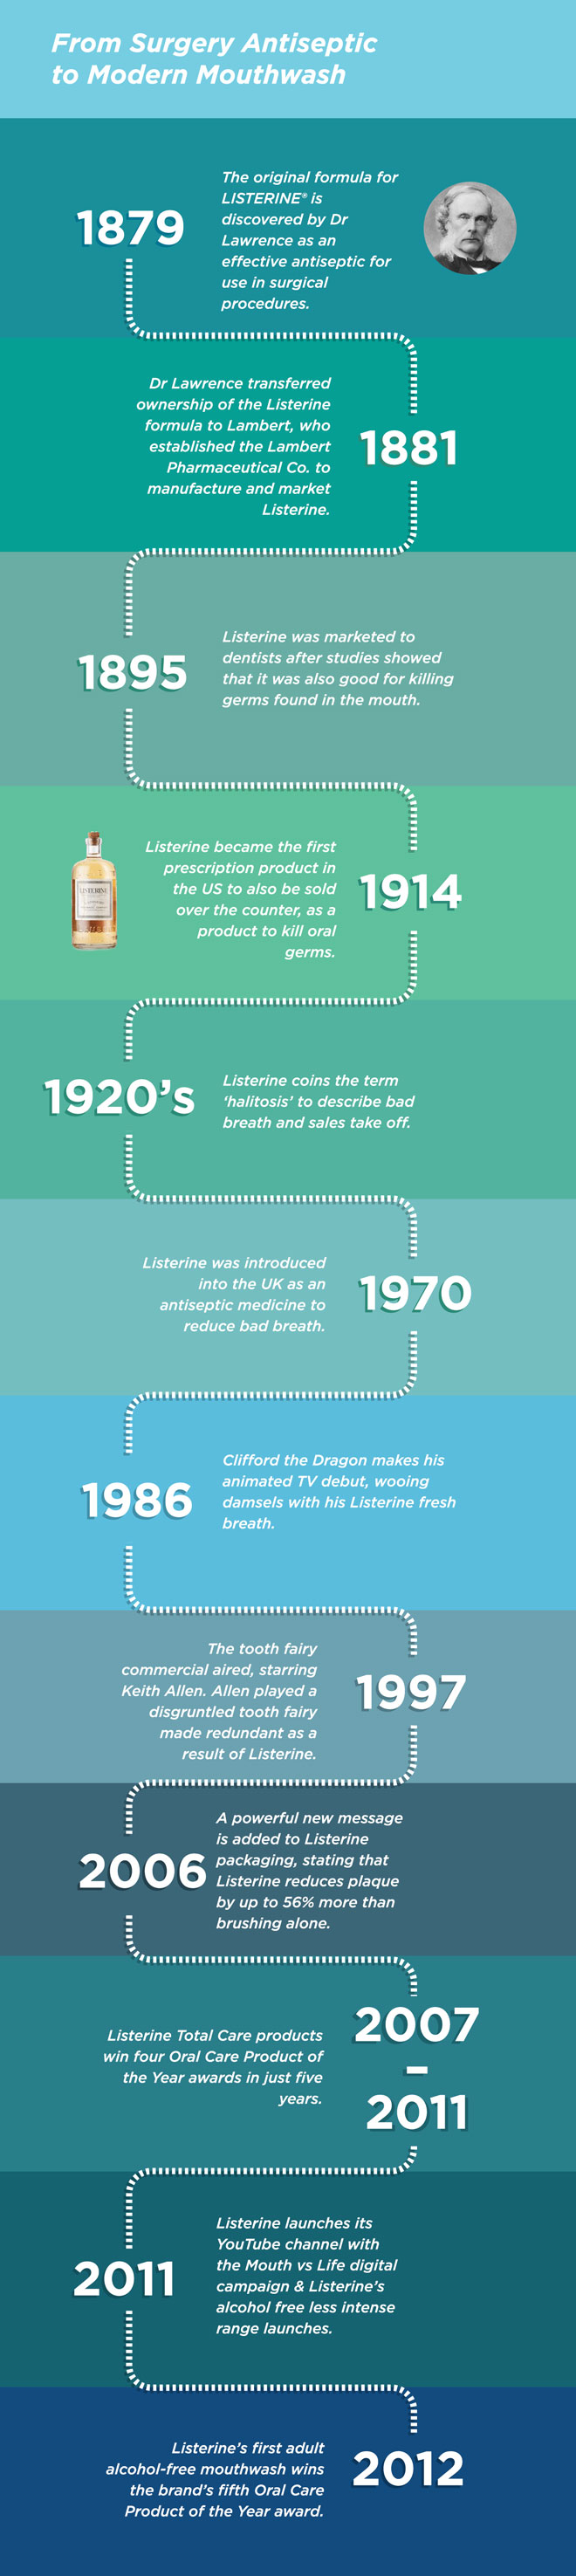 A timeline showing the history of Listerine from 1879 until 2021